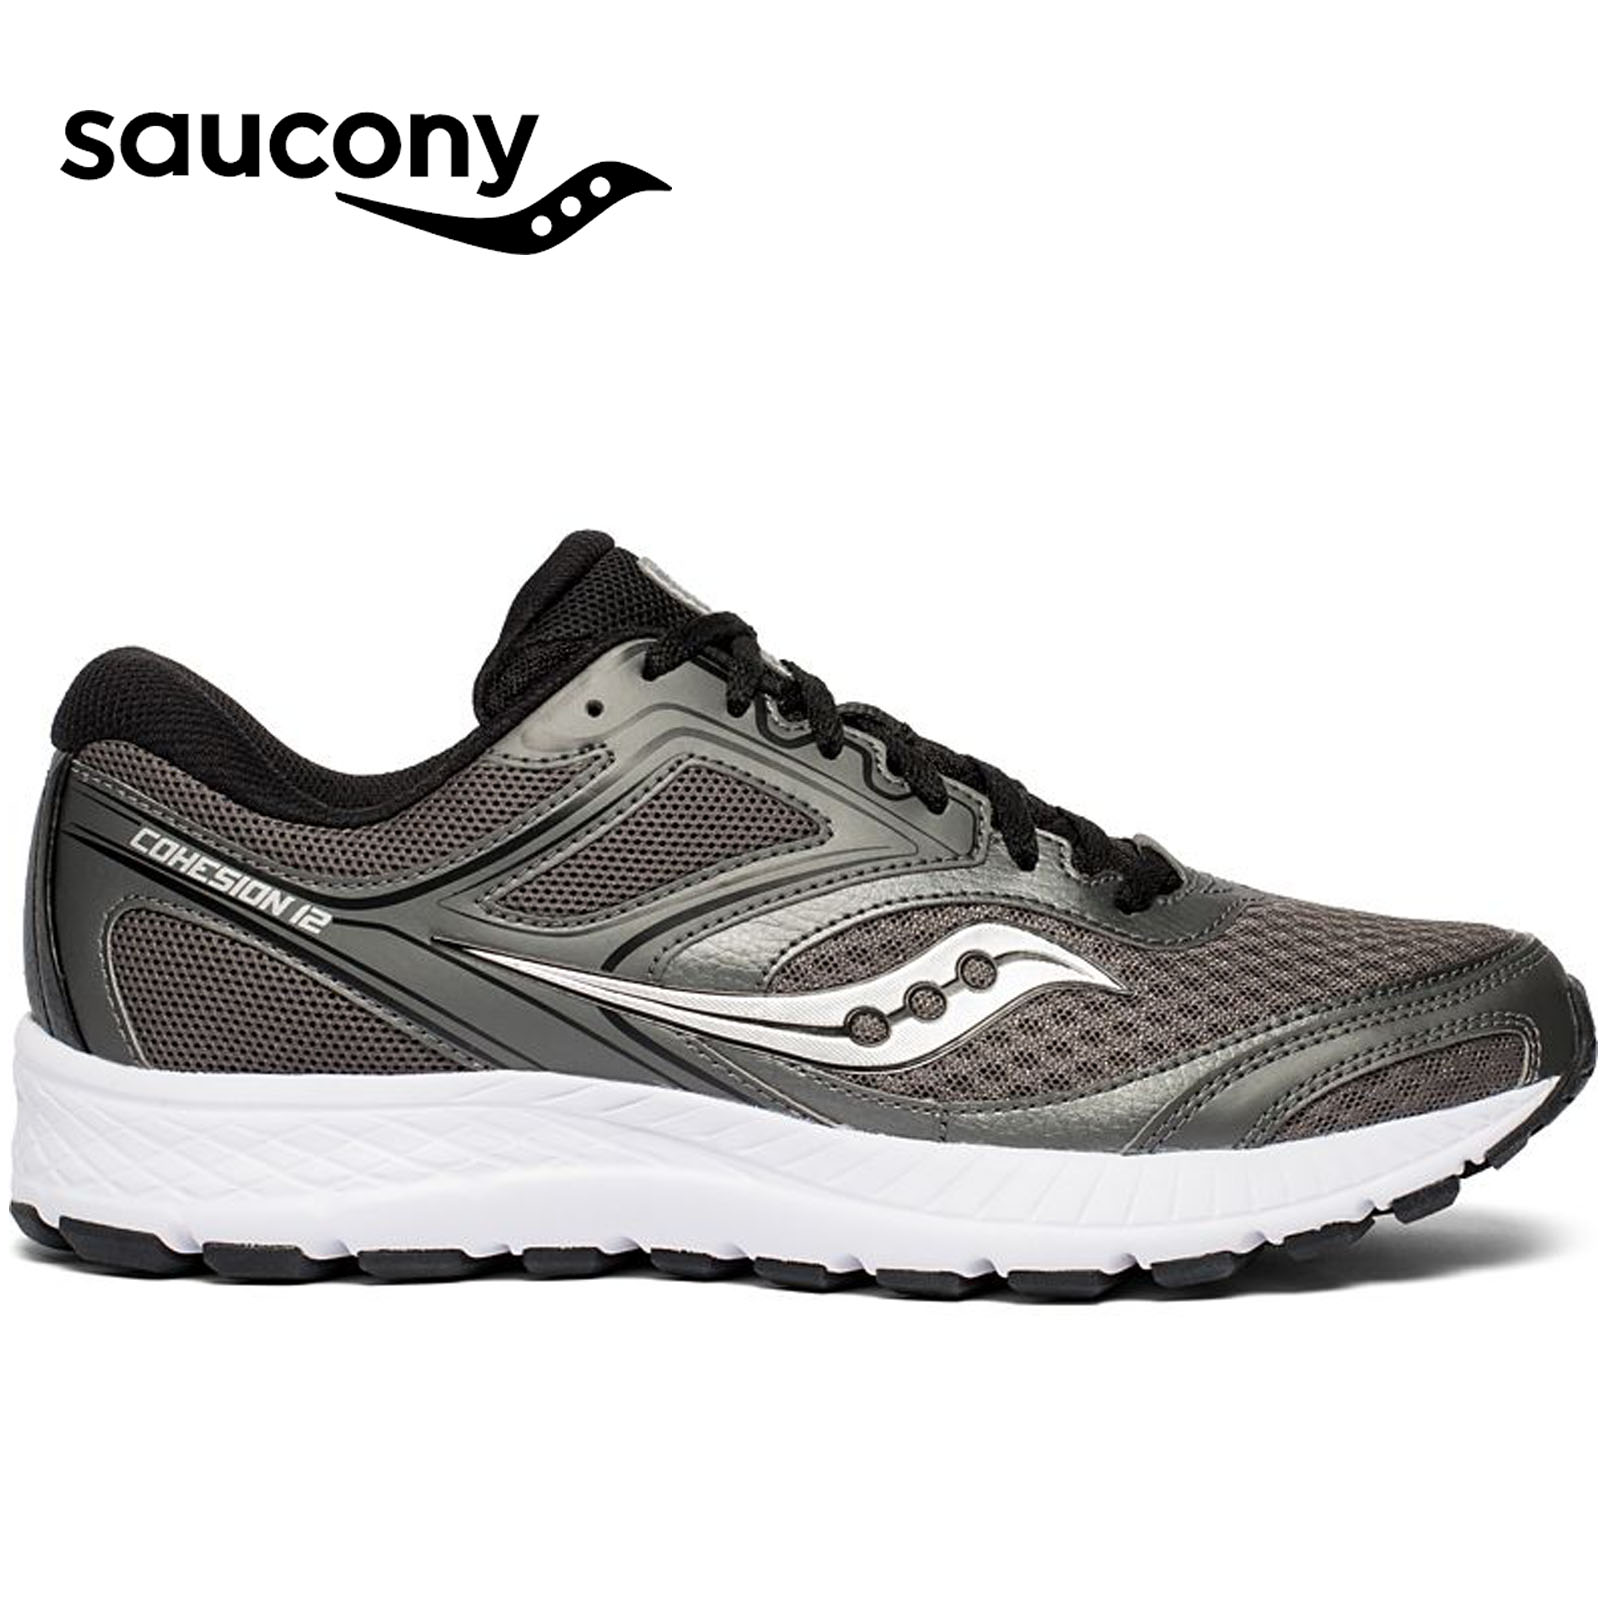 saucony mens cohesion 12 running shoes